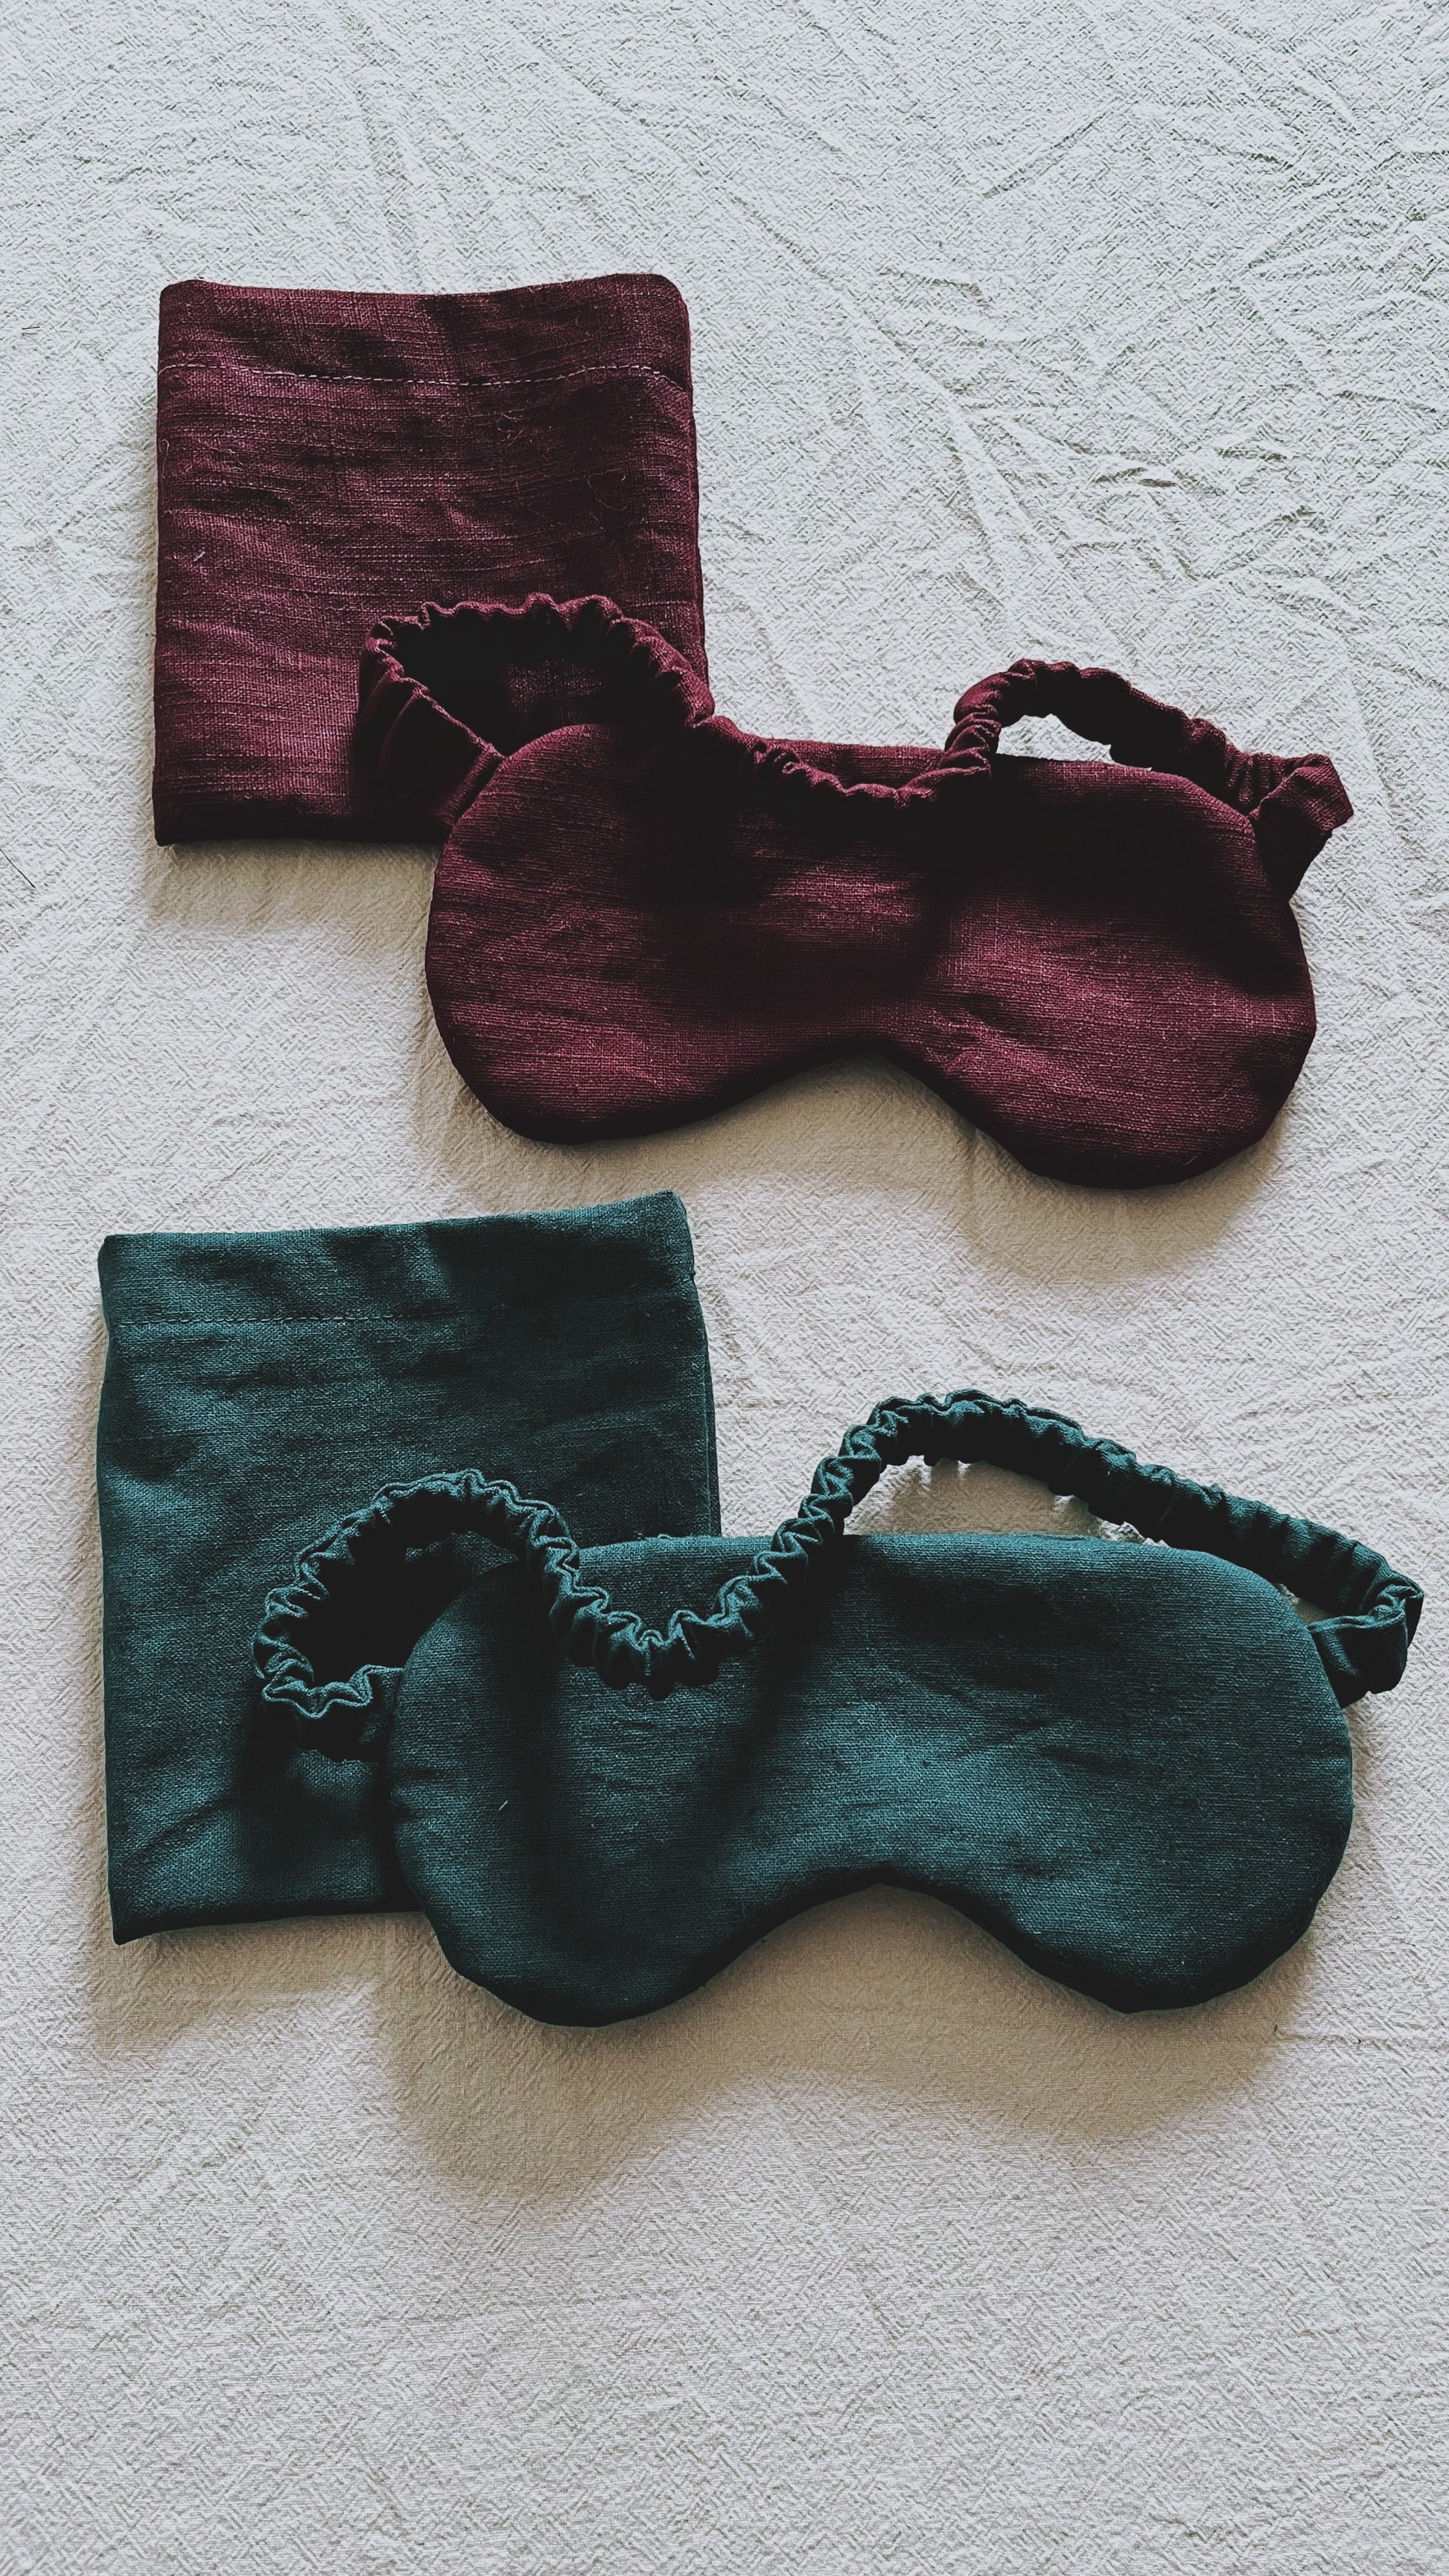 Washed linen sleep mask with keeper pouch -Teal Green - Walker & Walker